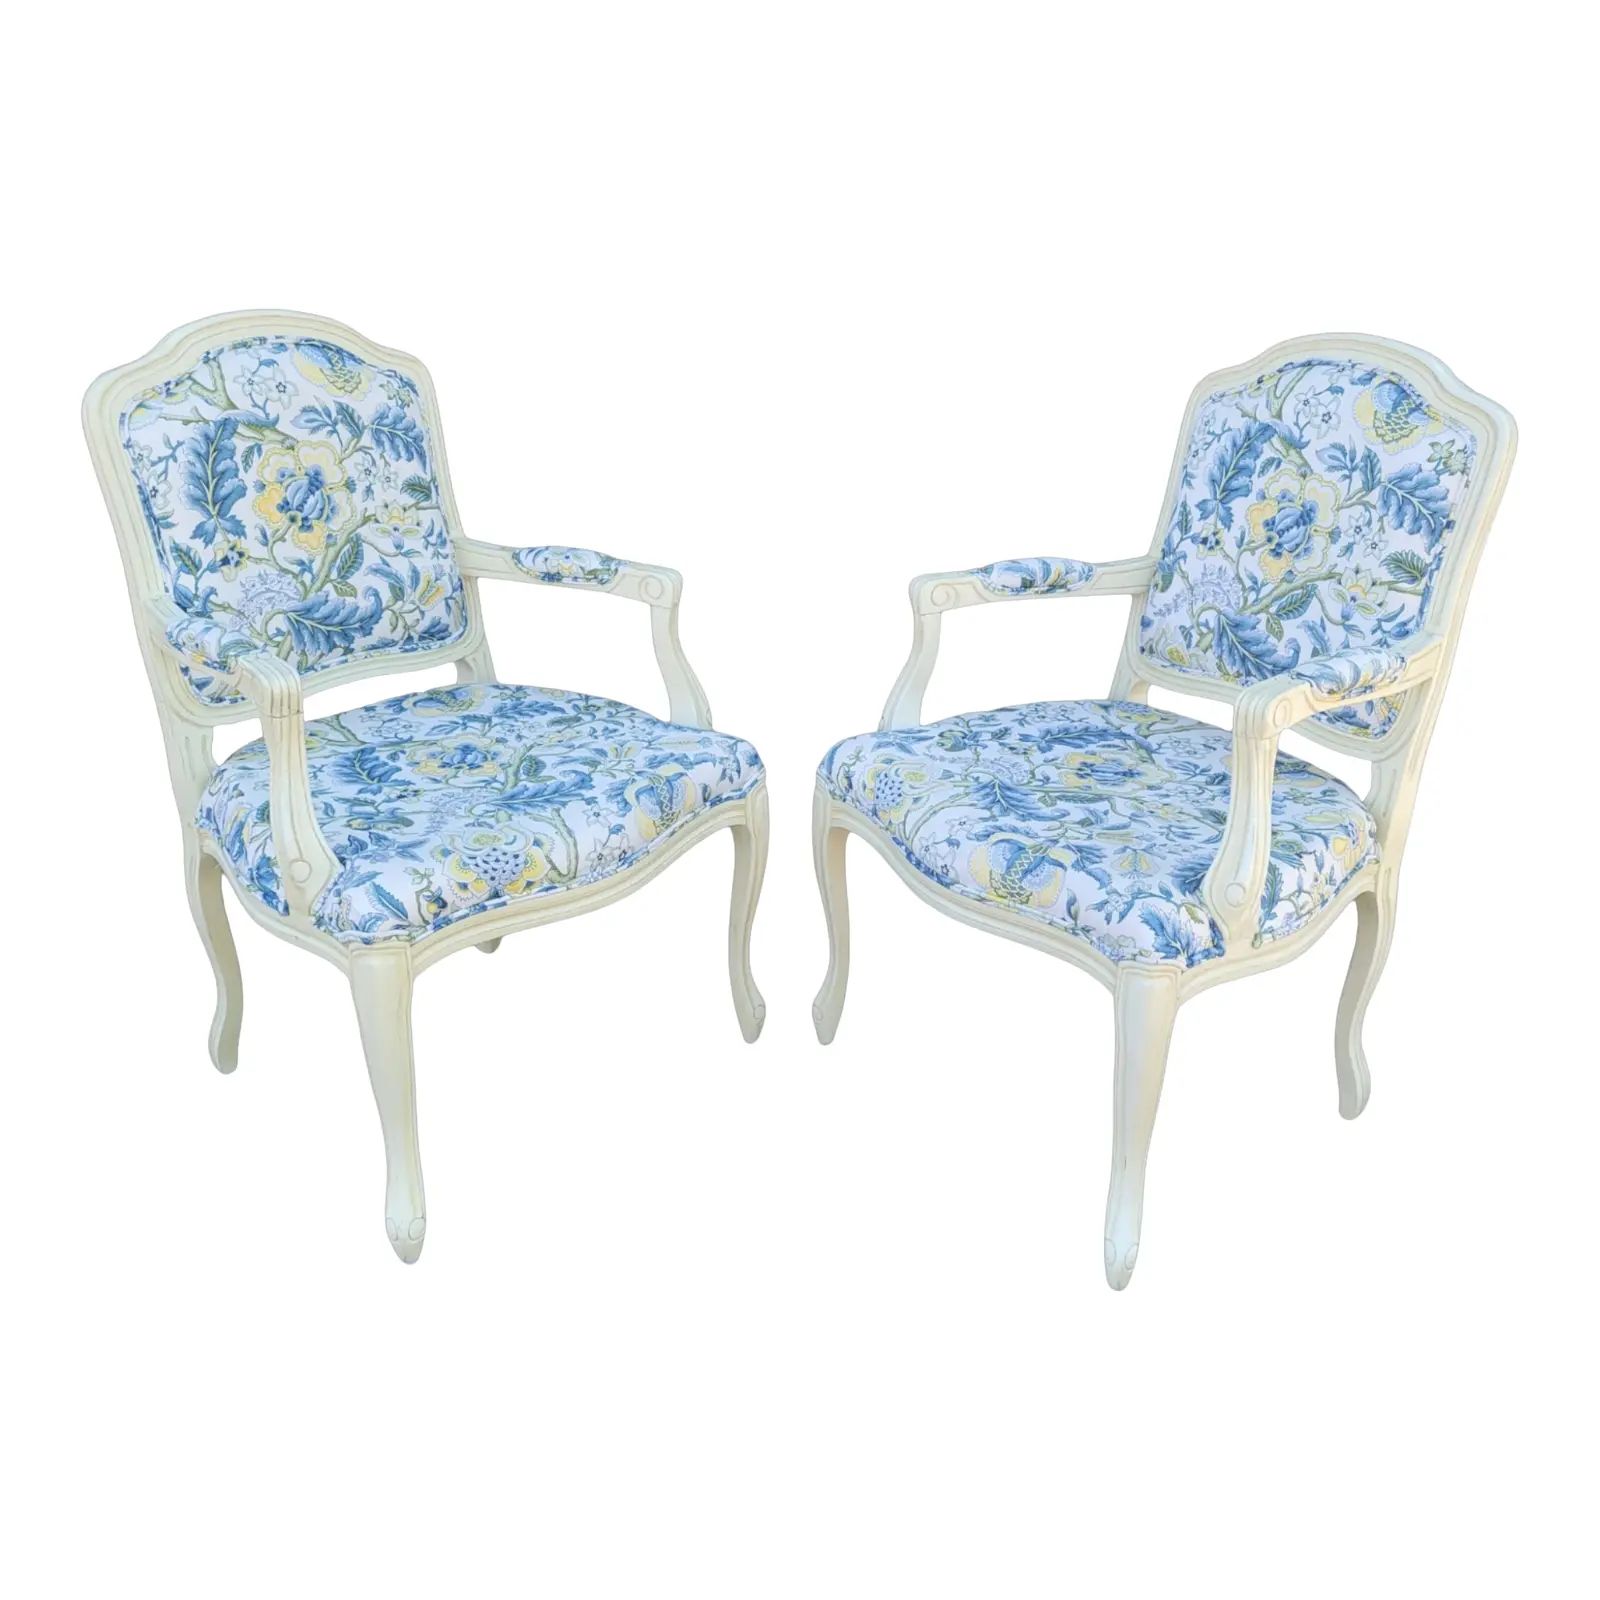 1970s French Provincial Style White Lacquer Armchairs - a Pair | Chairish